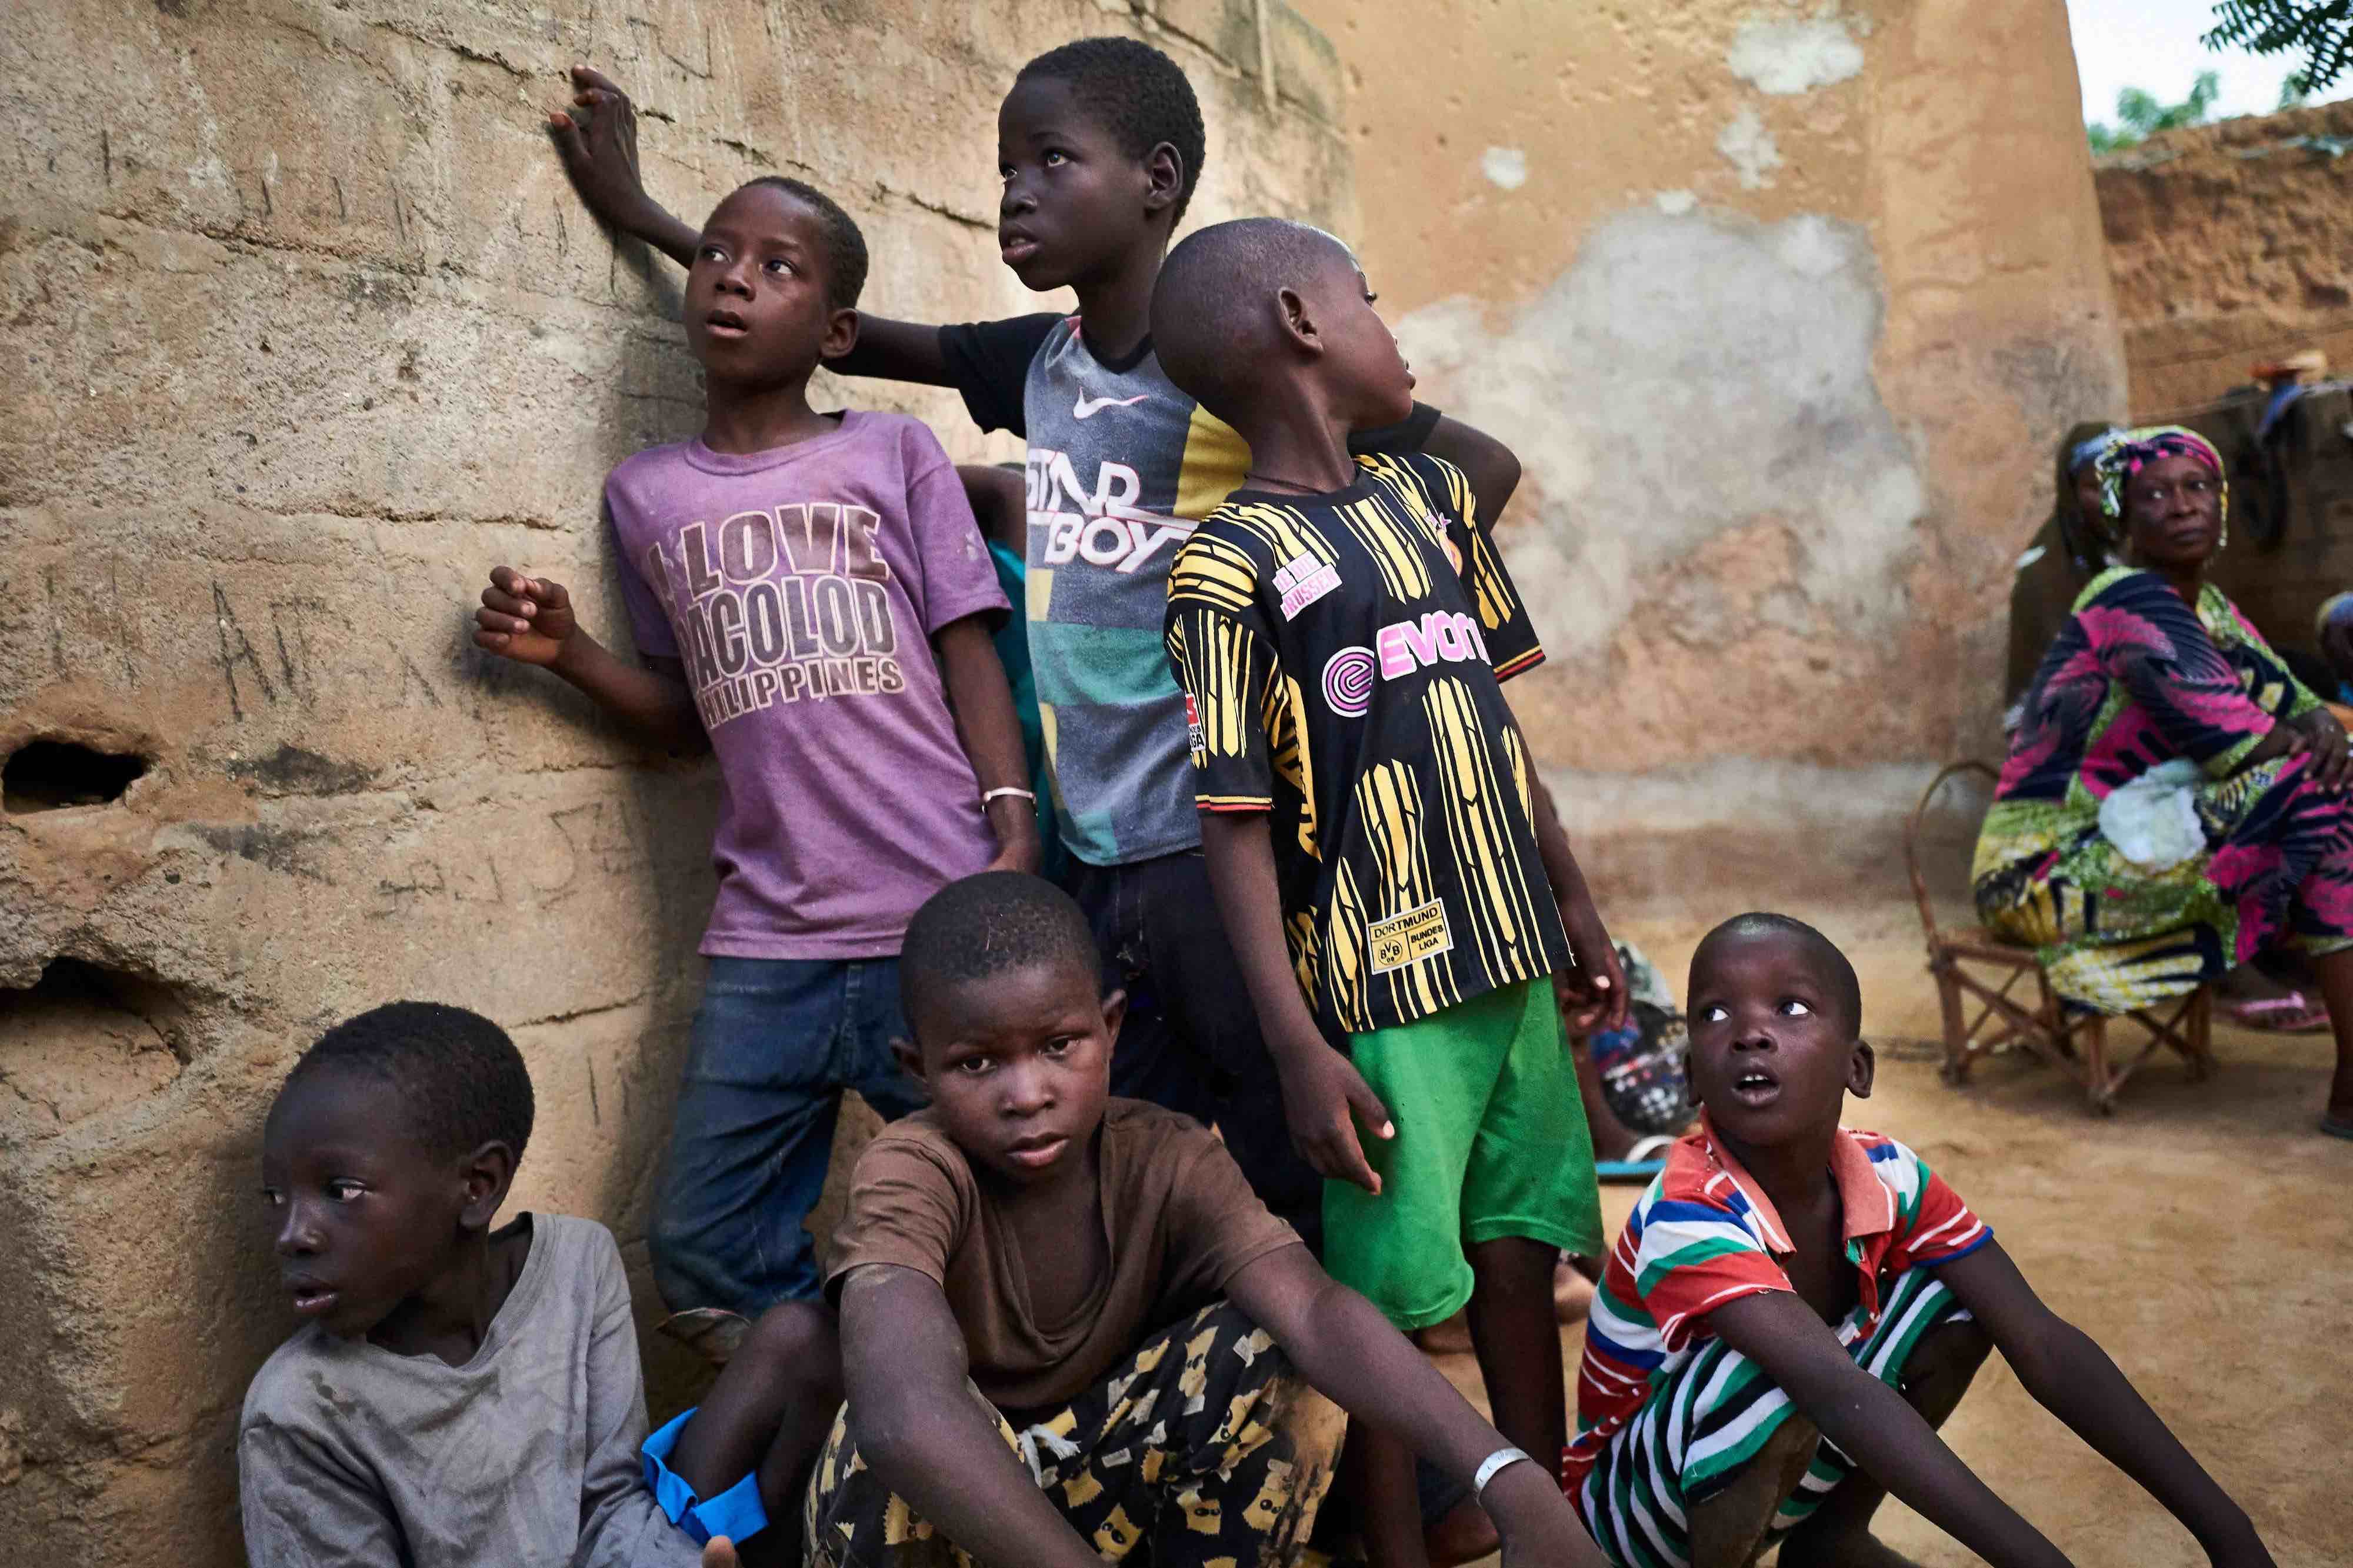 Mali is the only country for which there are hard figures on the number of child war victims